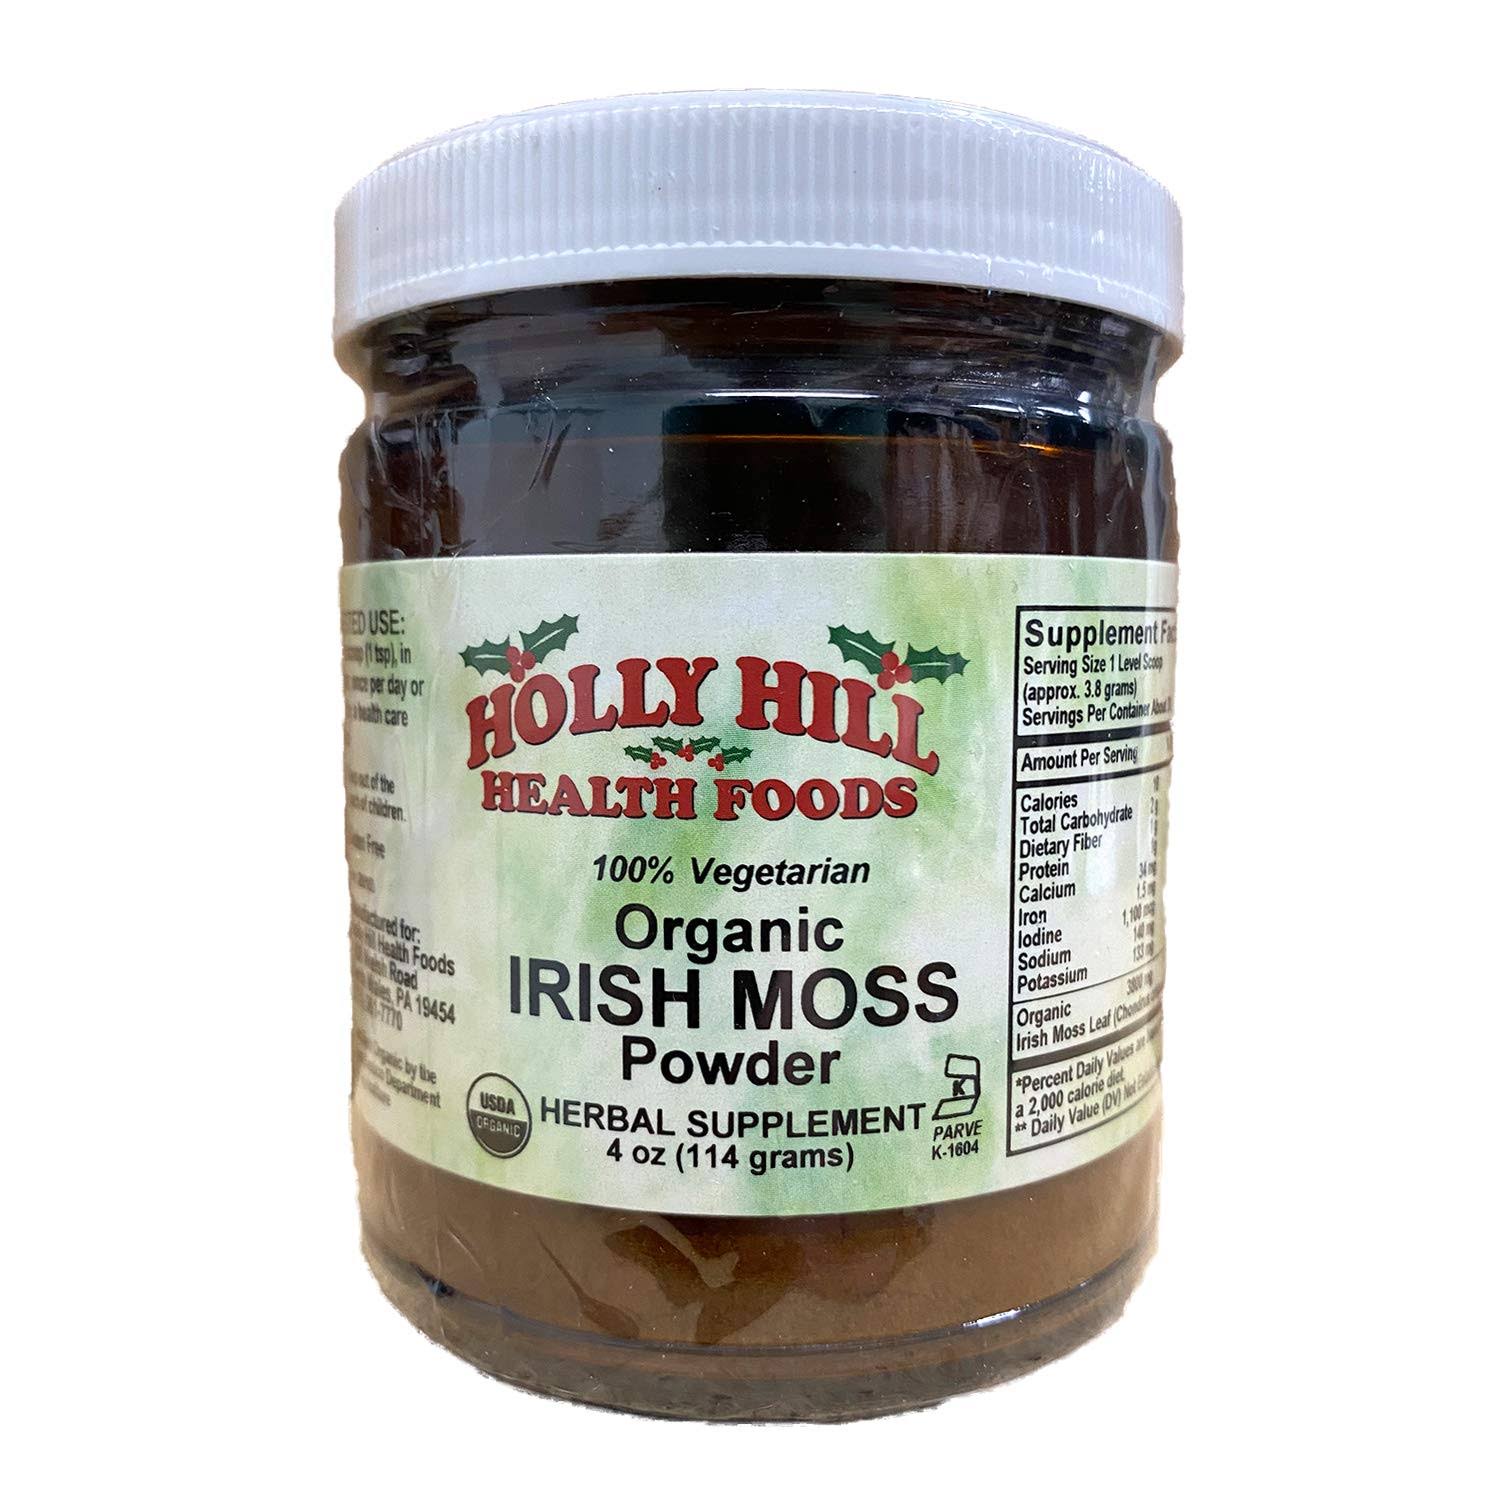 Holly Hill Health Foods Organic Irish Moss Powder - 4 Ounces - GreenAcres - Lawton - Delivered by Mercato